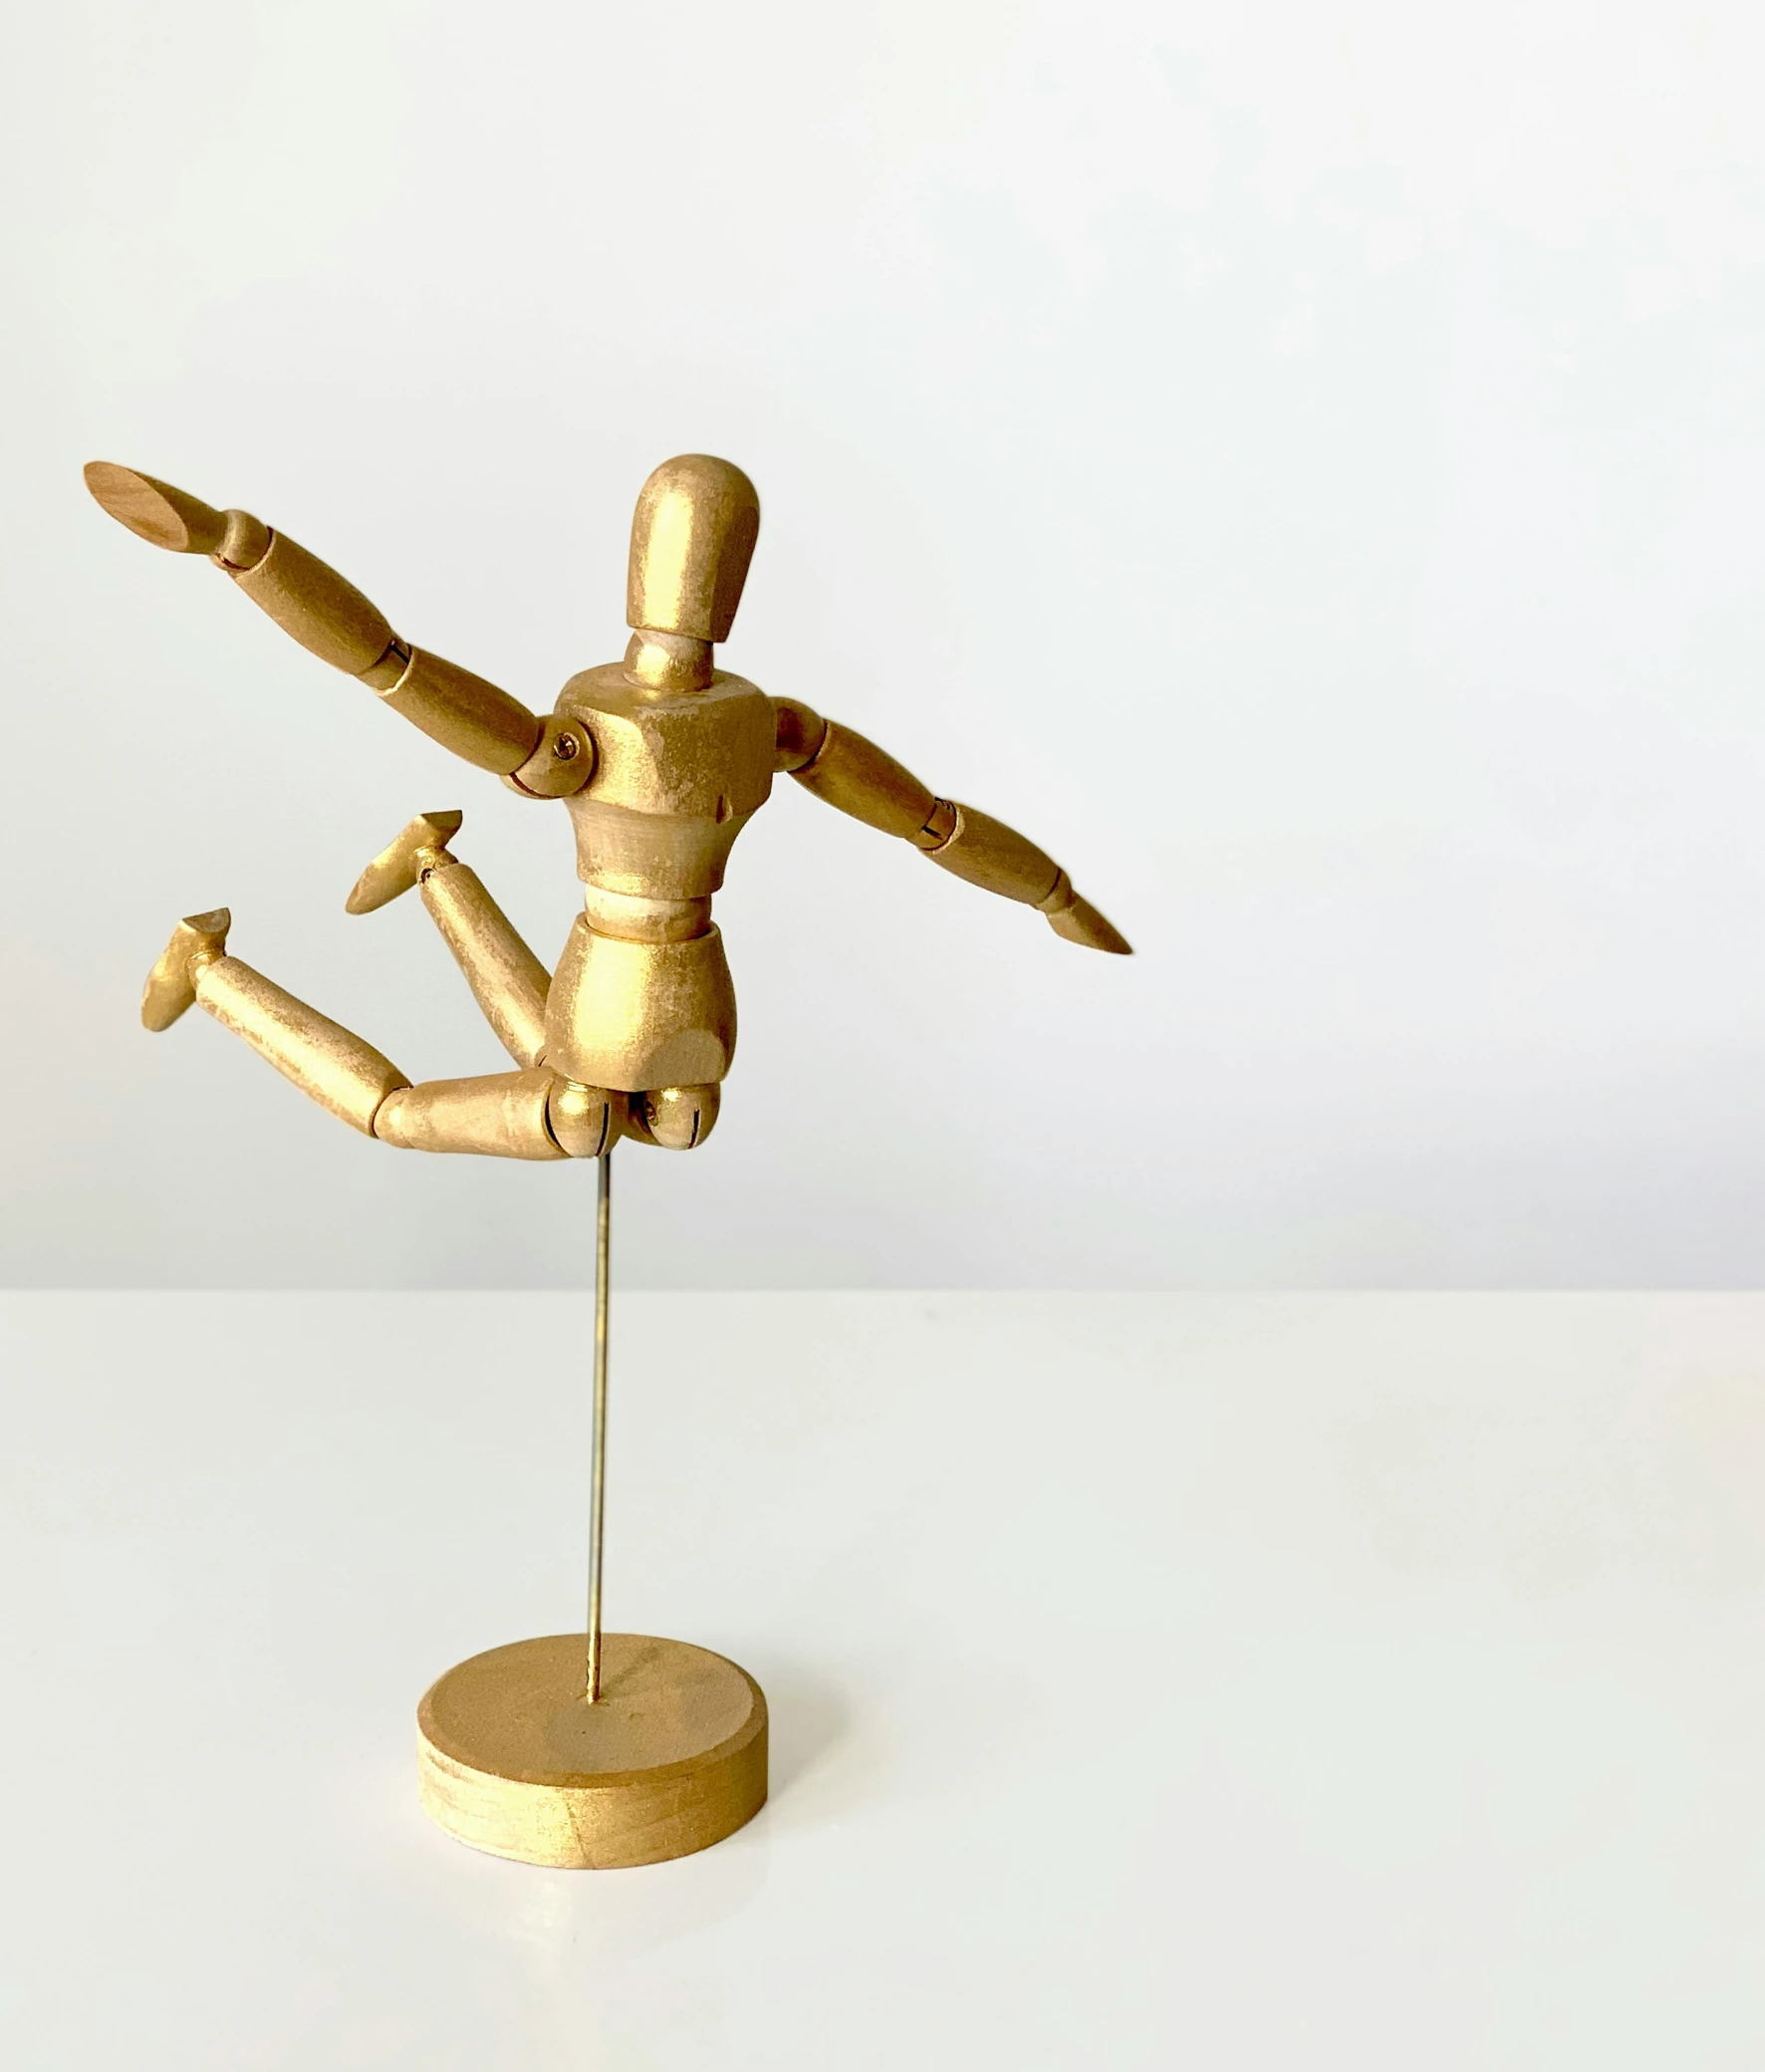 a wooden mannequin on a stand on a white surface, by Arabella Rankin, kinetic art, a boy made out of gold, kawaii playful pose of a dancer, vintage european folk art, singularity sculpted �ー etsy